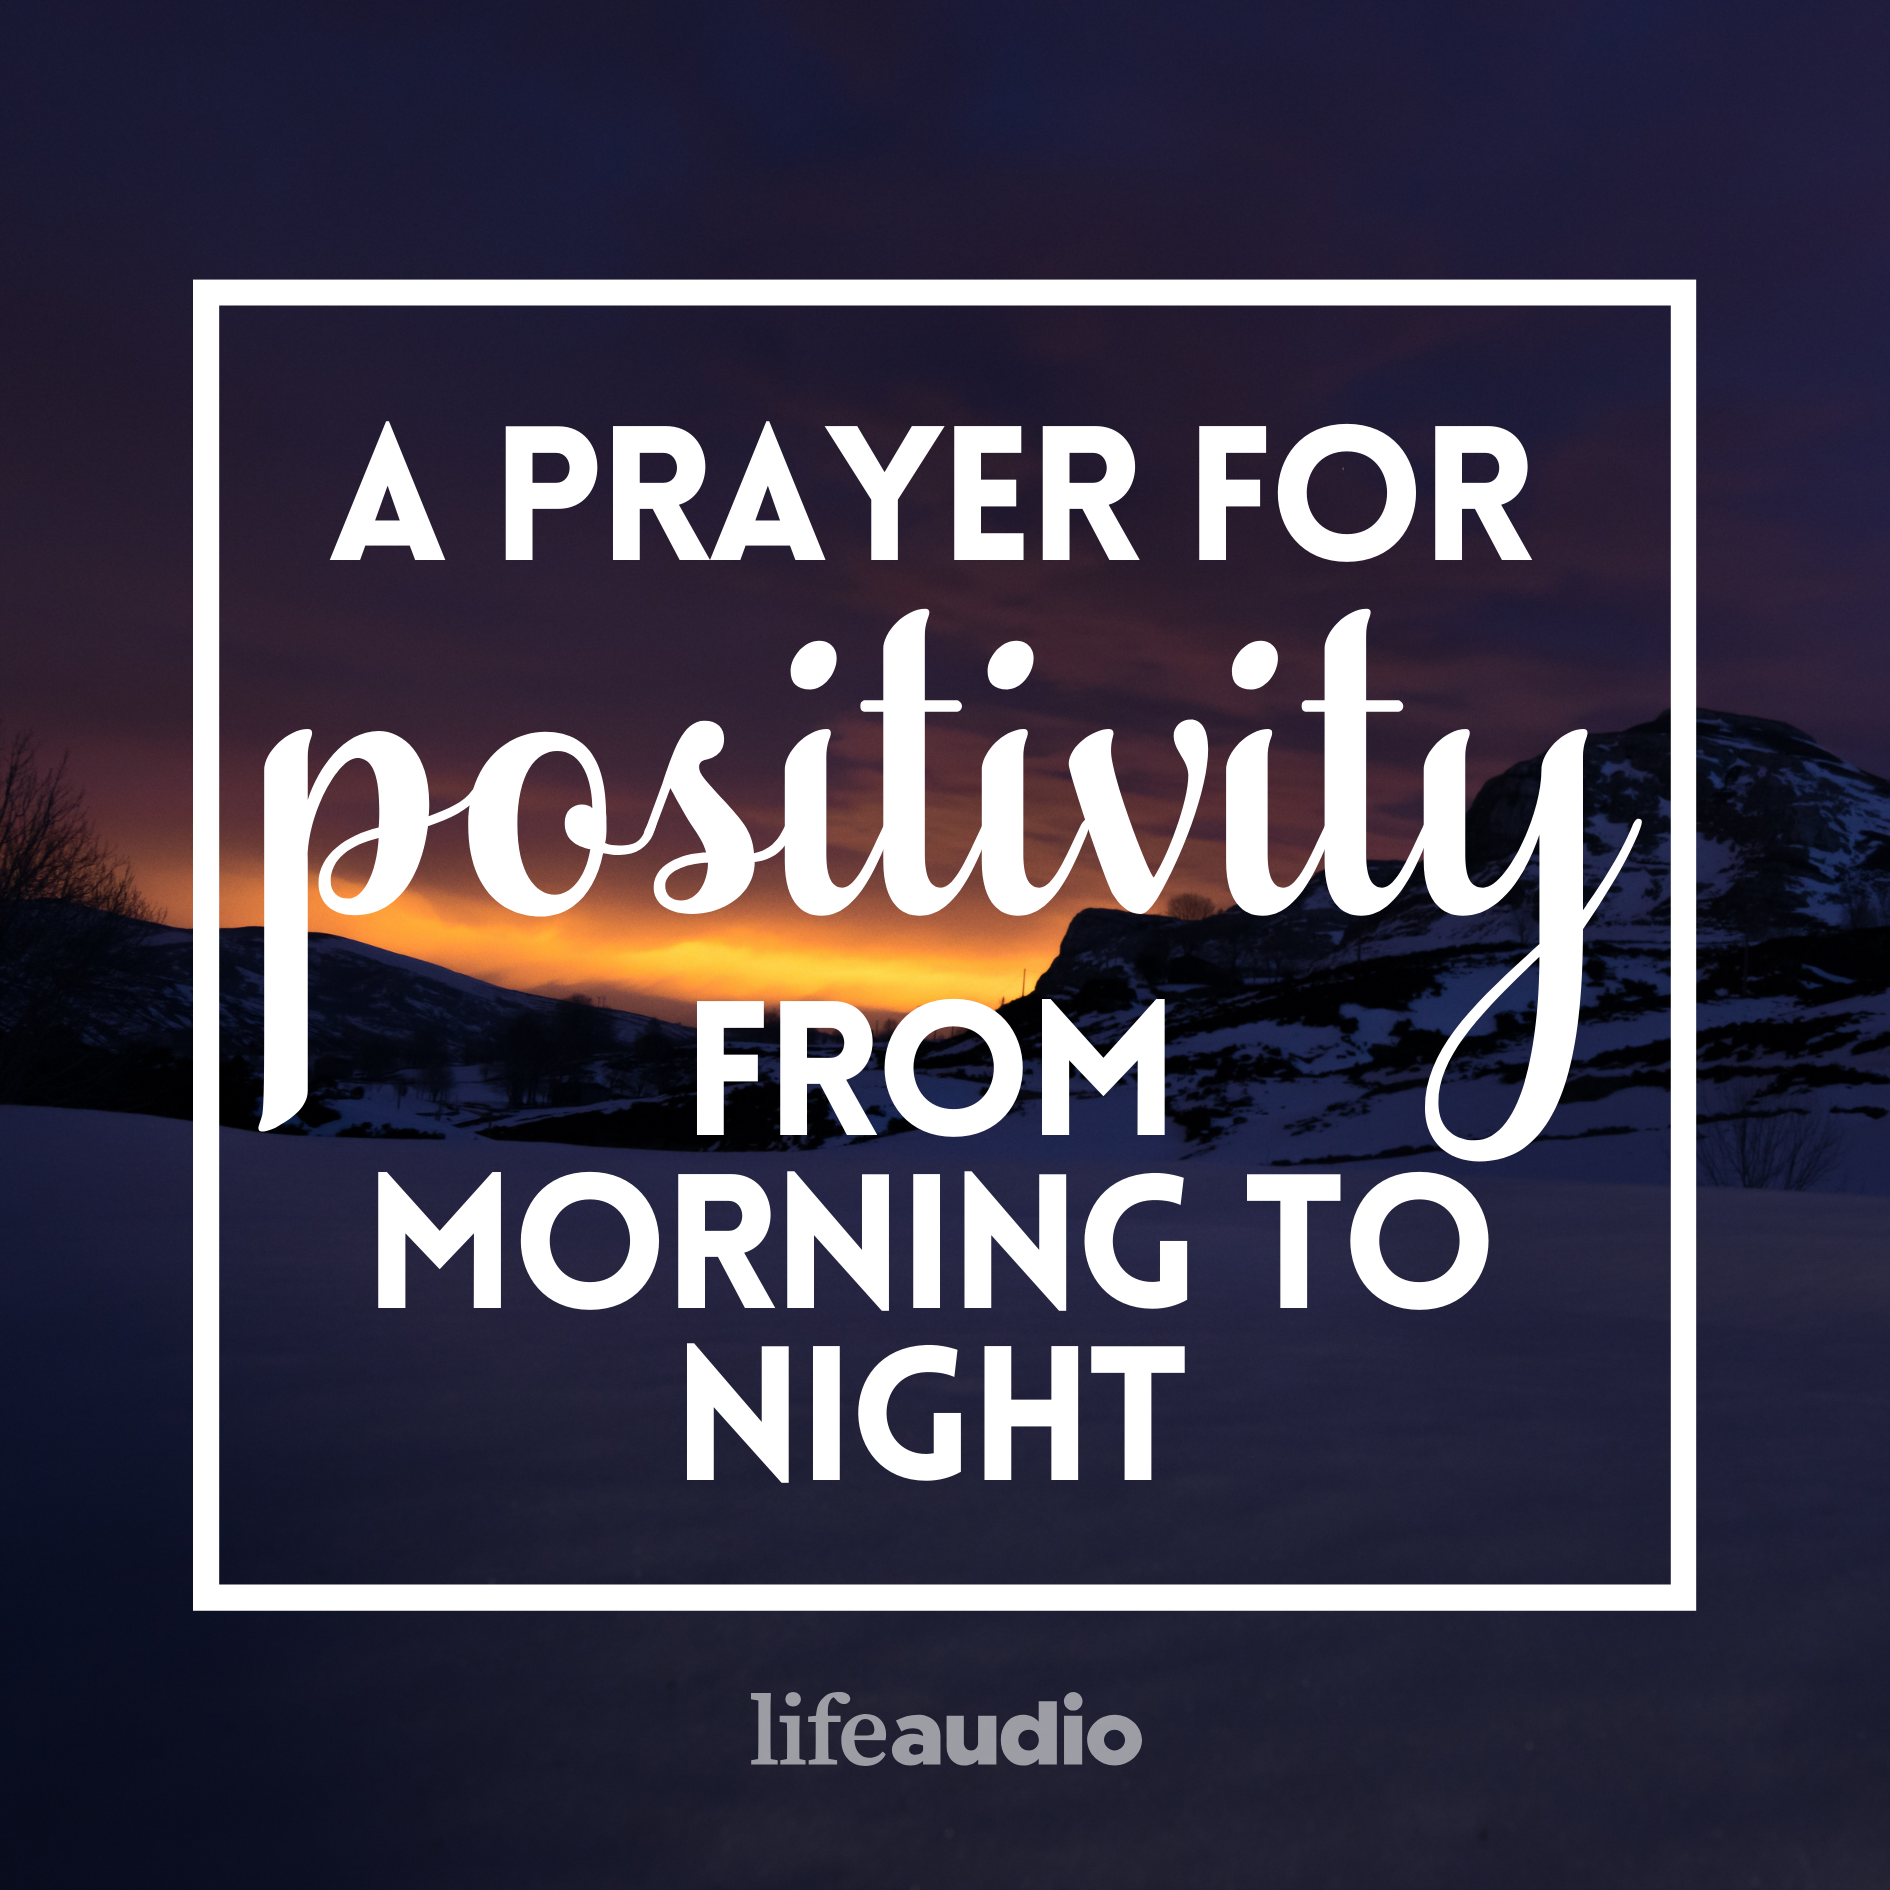 A Prayer for Positivity from Morning to Night